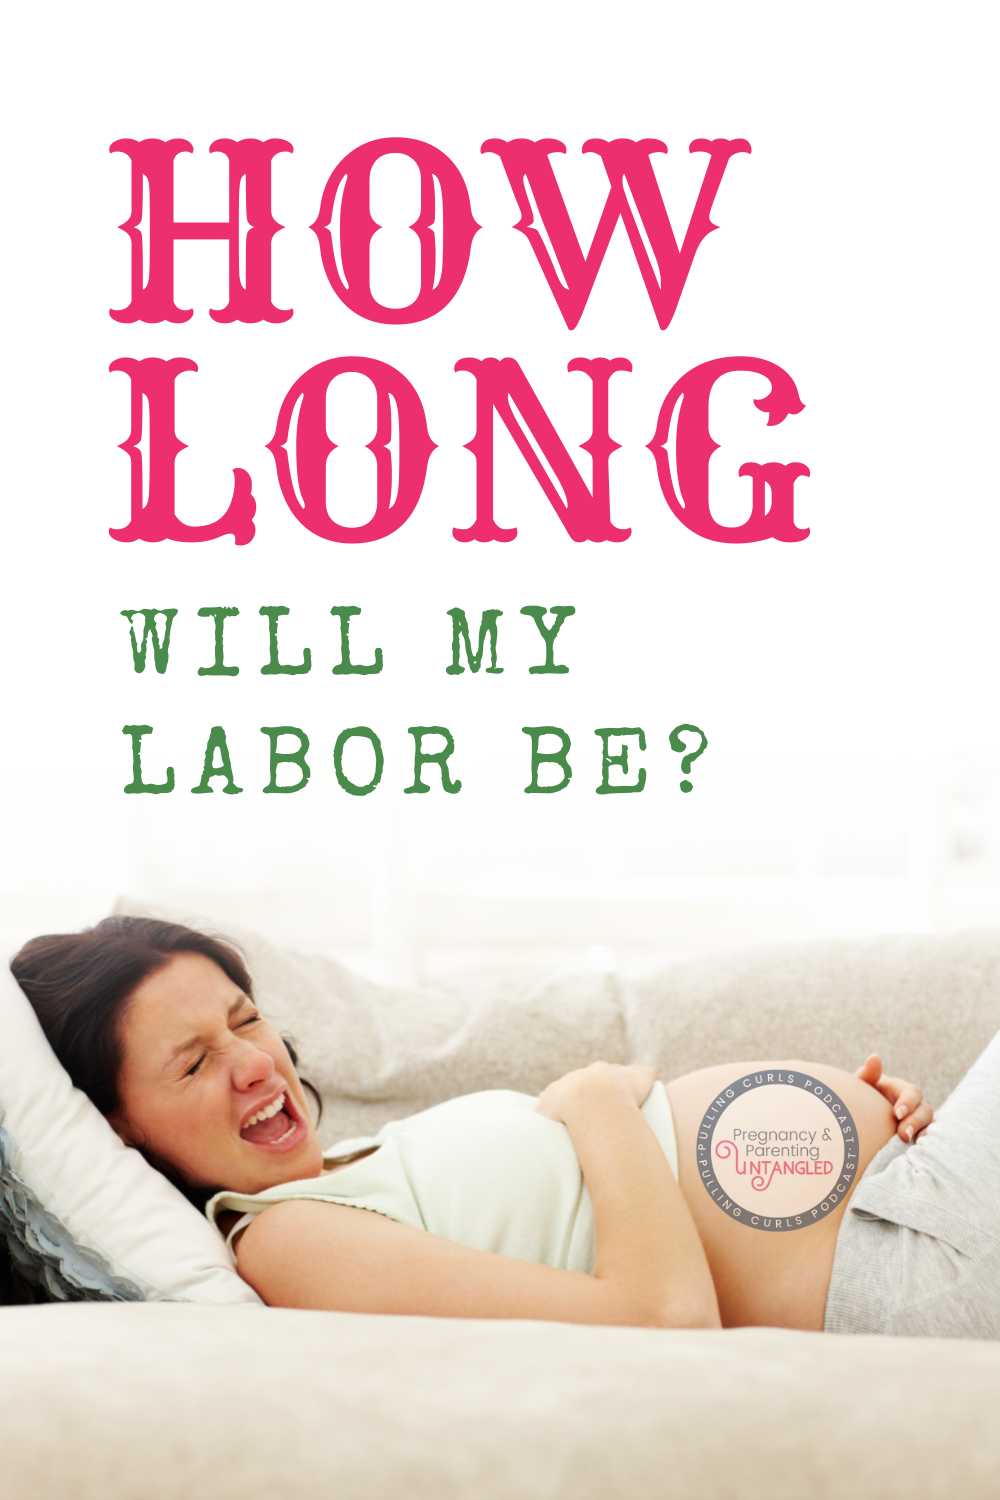 No one can tell you how long your labor will be, but this episode of Rochelle L&D RN offers some tips to help it go as smoothly as possible. Listen in for information on what to expect and learn more about ways to decrease the length of your labor. via @pullingcurls